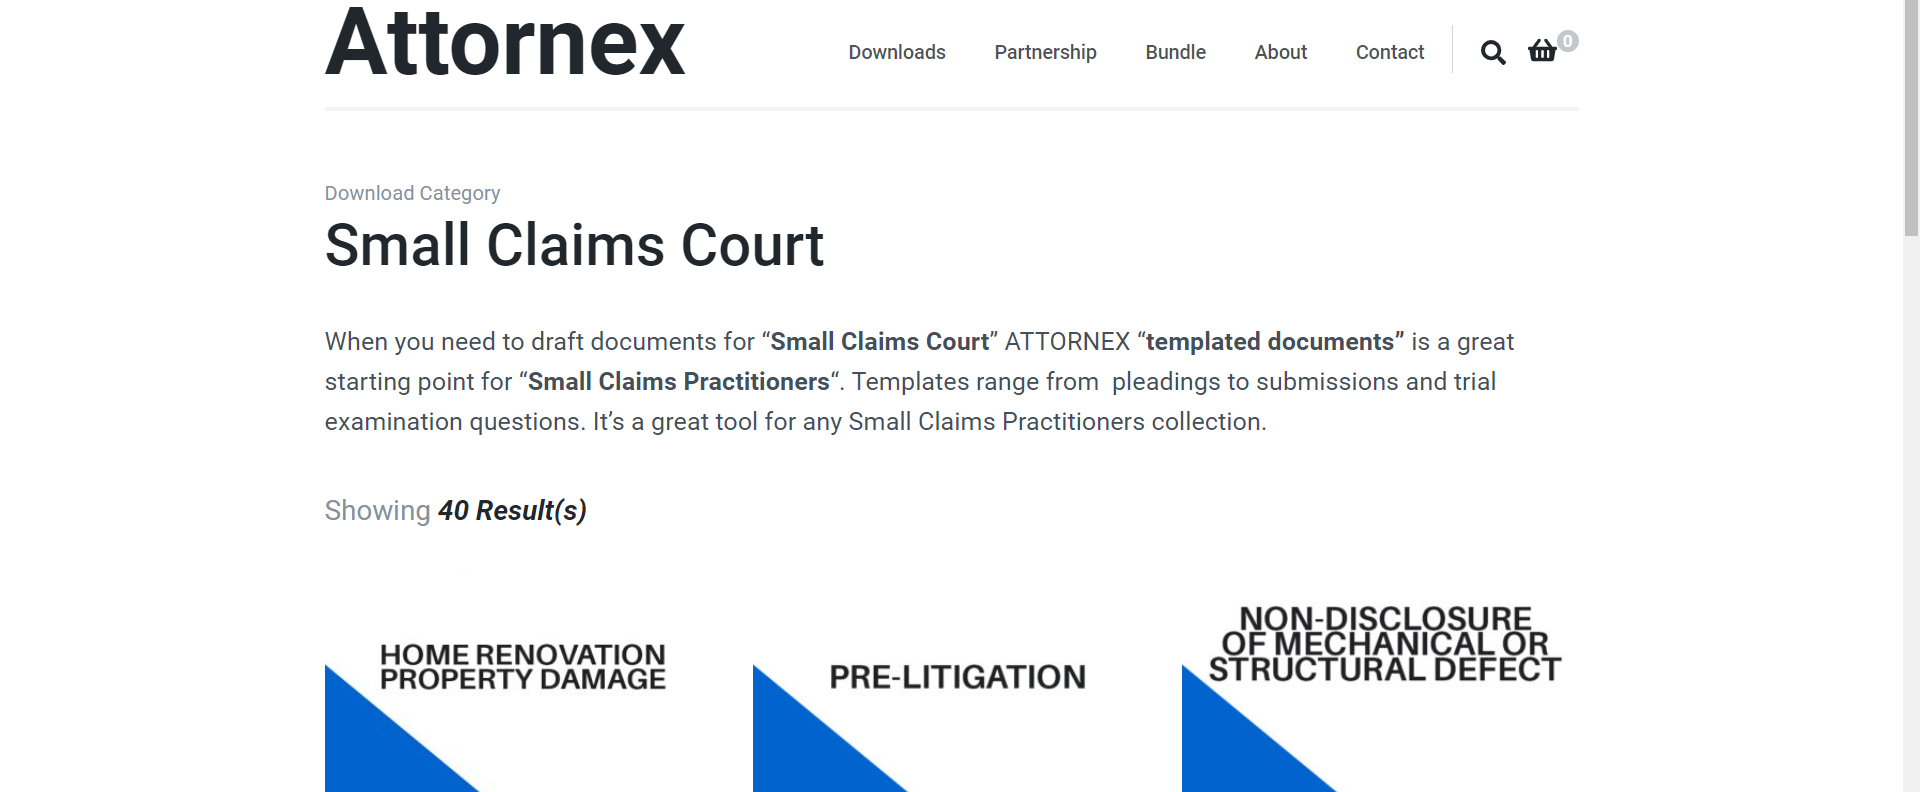 Small Claims Court Templates Attornex